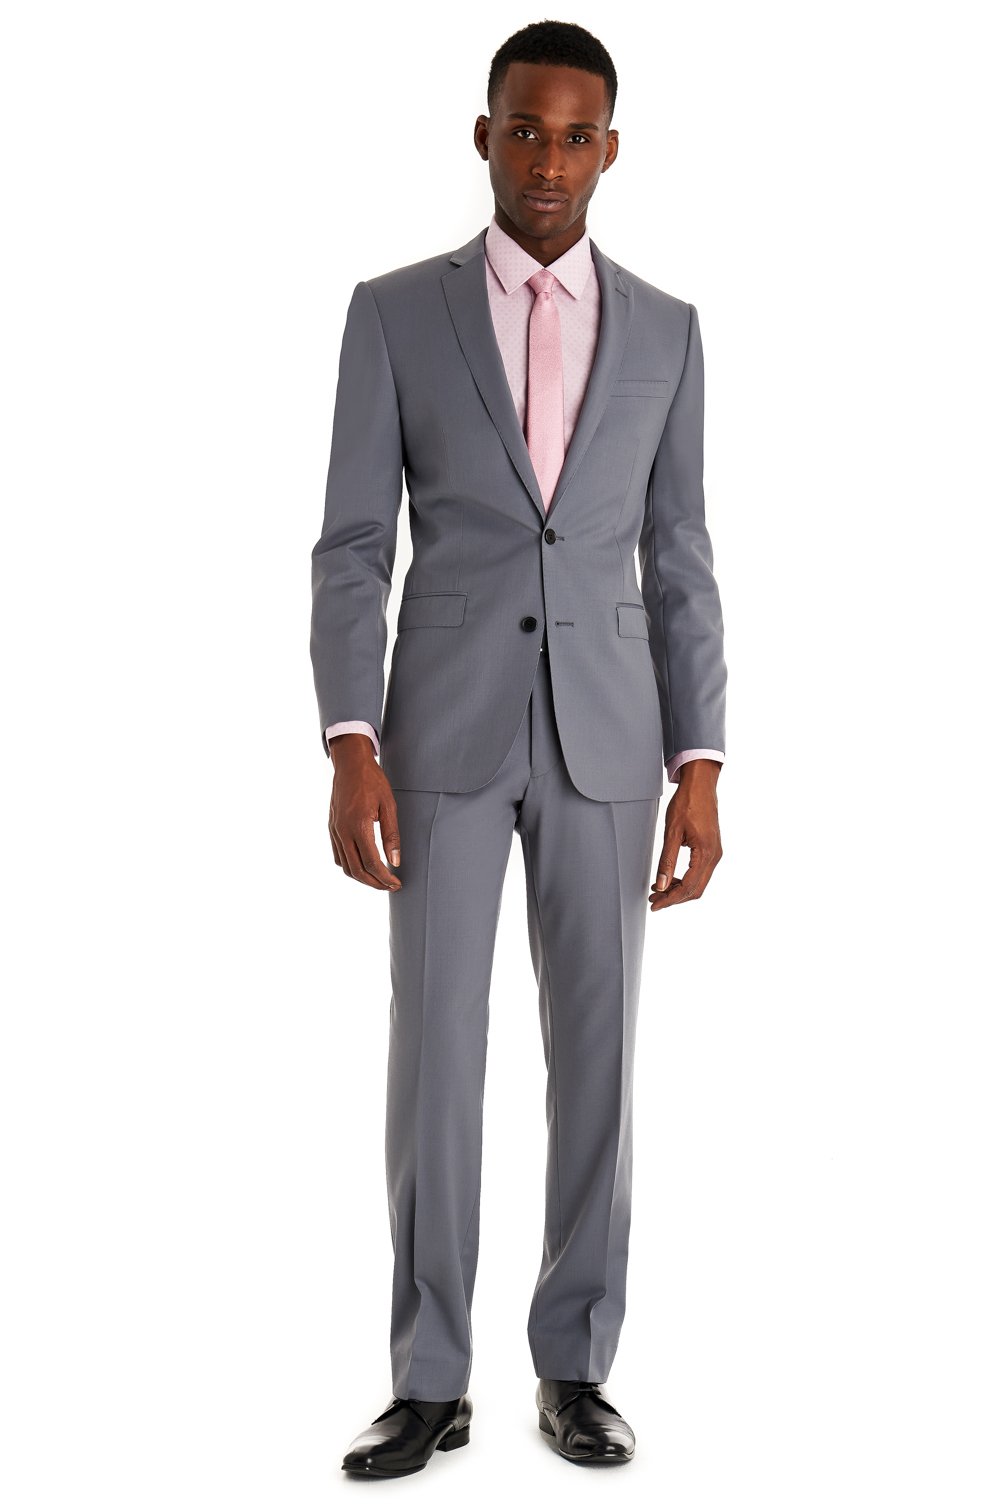 Mens Suits Grey Color - Ted Baker Slim Fit Grey Check 3 Piece Suit in ...